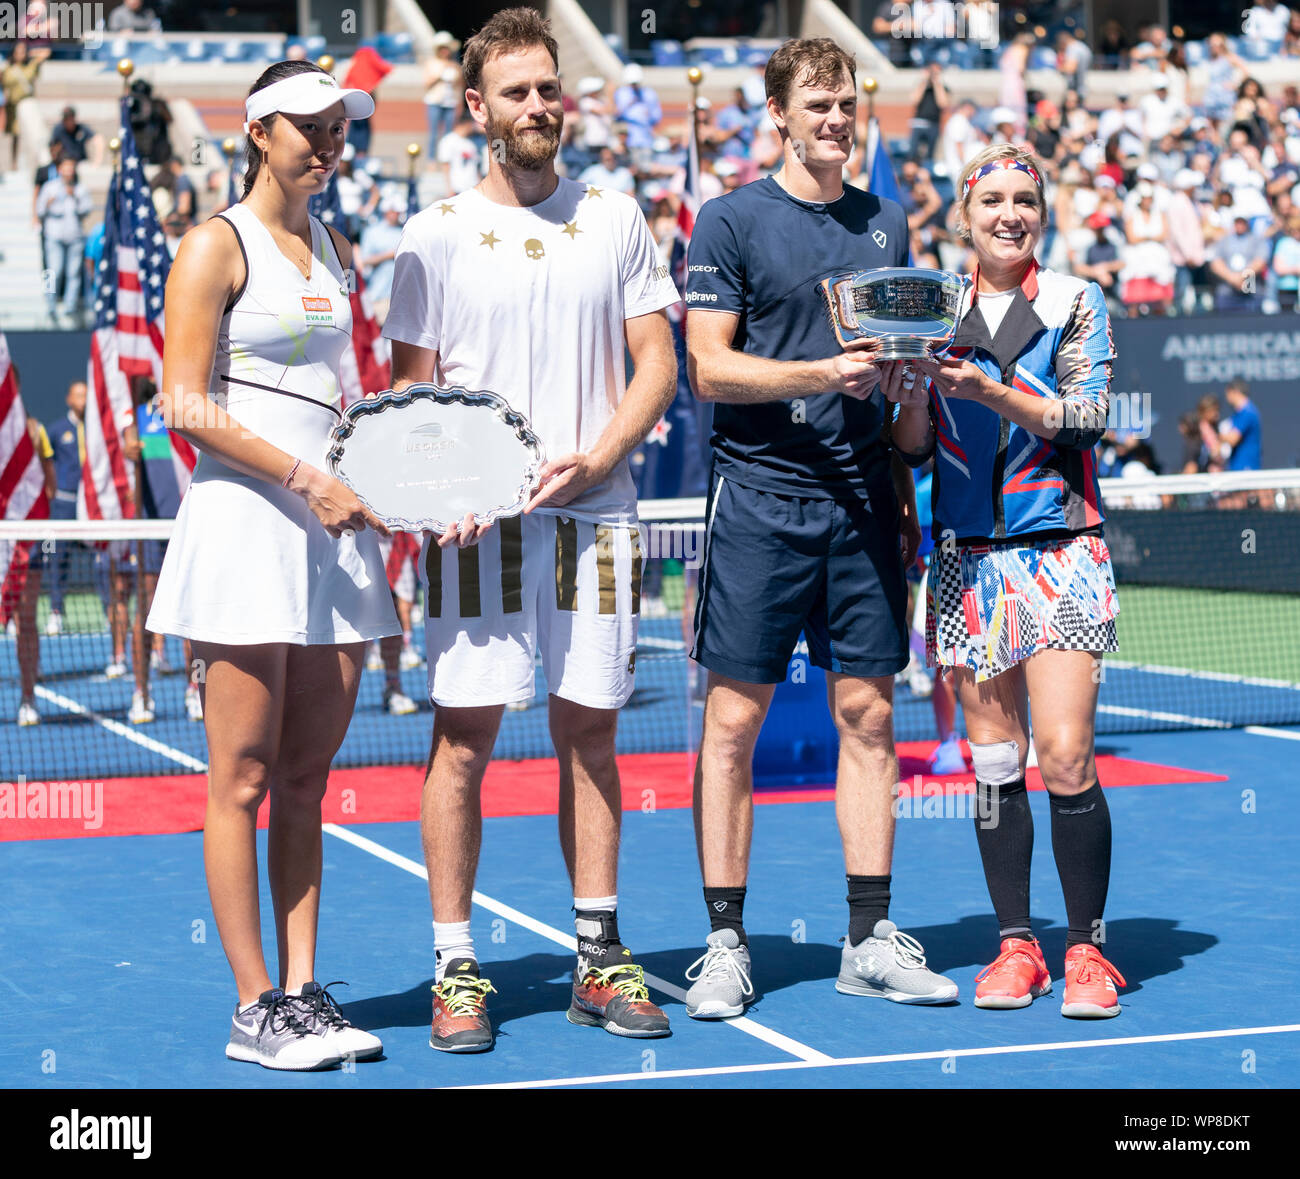 New York, NY - September 7, 2019: Bethanie Mattek-Sands (USA), Jamie Murray (Great Britain) and Hao-Ching Cahn (Taipei), Michael Venus (New Zeland) pose with there trophies after mixed doubles final match at US Open Championships at Billie Jean King National Tennis Center Stock Photo